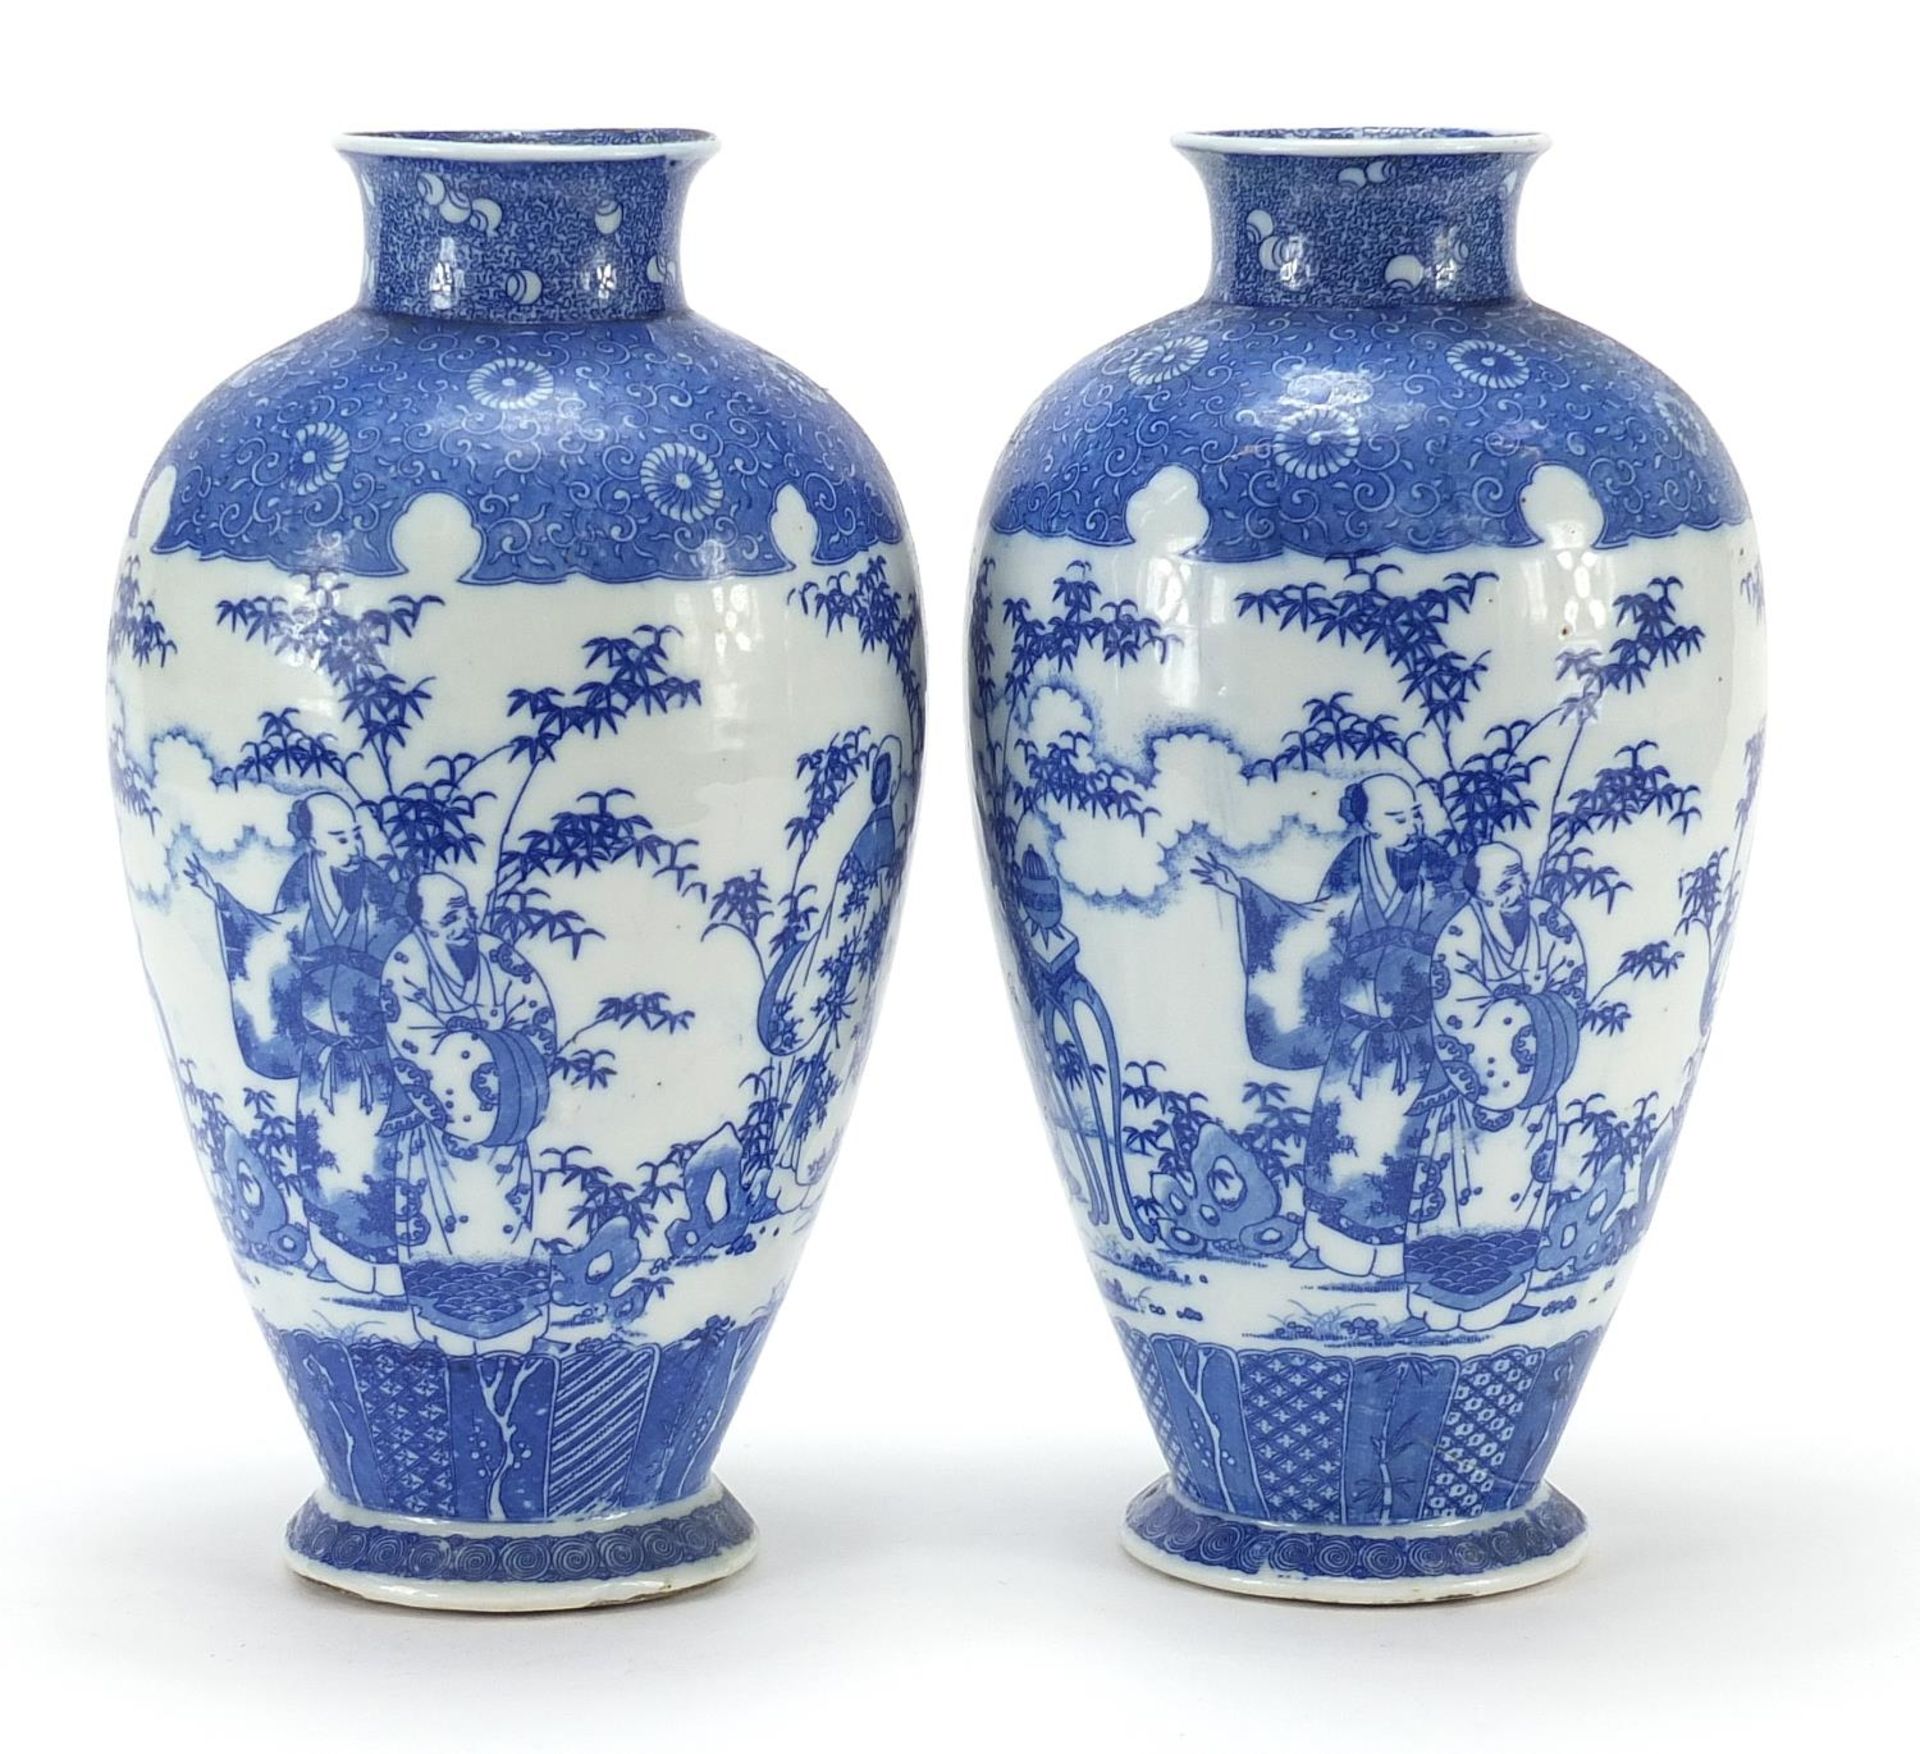 Pair of Japanese blue and white porcelain vases, each decorated with scholars in a landscape, - Image 4 of 9